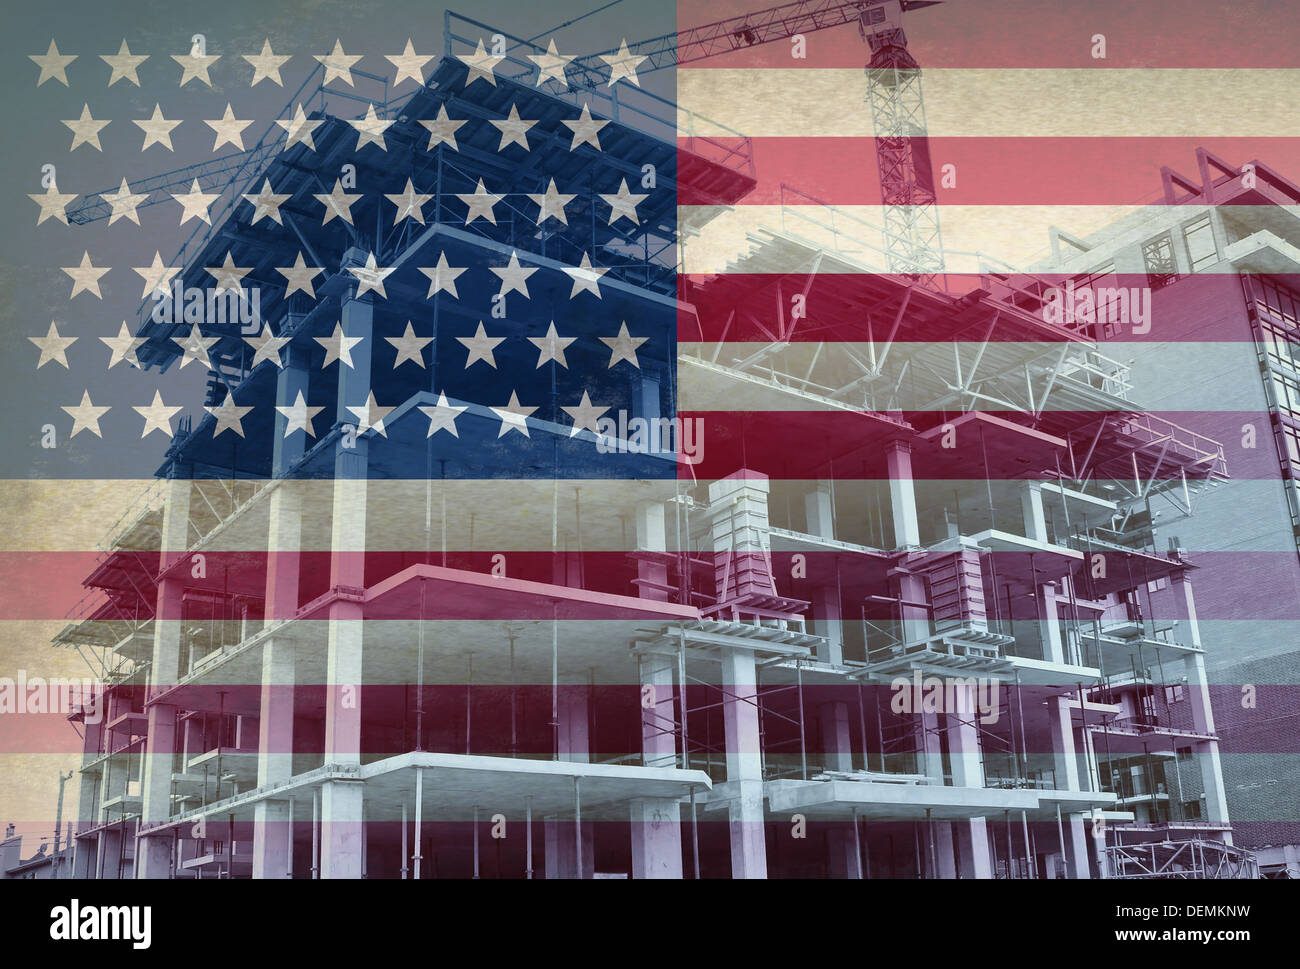 American Economic Development business and industry concept with the flag of the United States and a construction site with a concrete structure in the process of being built with a tower crane as a commercial real estate building. Stock Photo